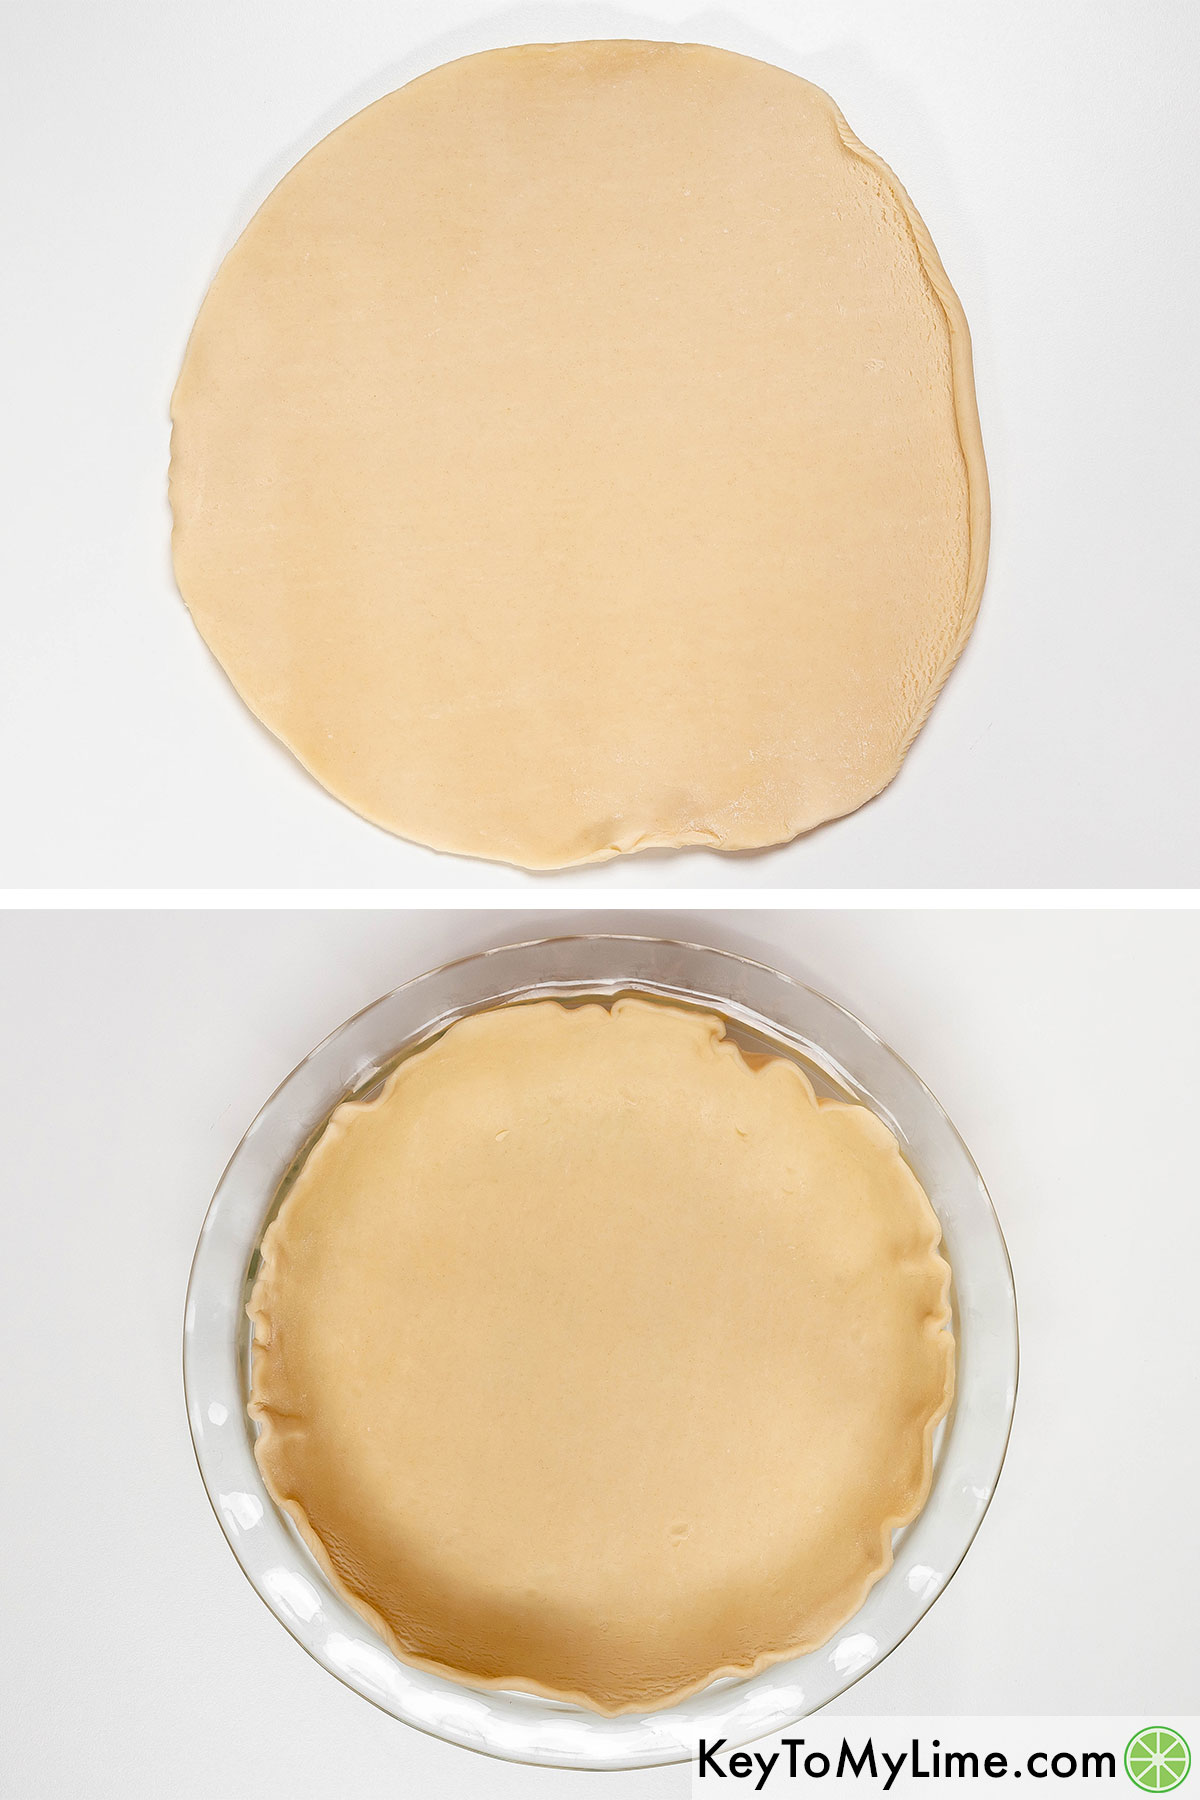 Rolling out the first pie crust then transferring to a 9.5 inch glass pie dish.